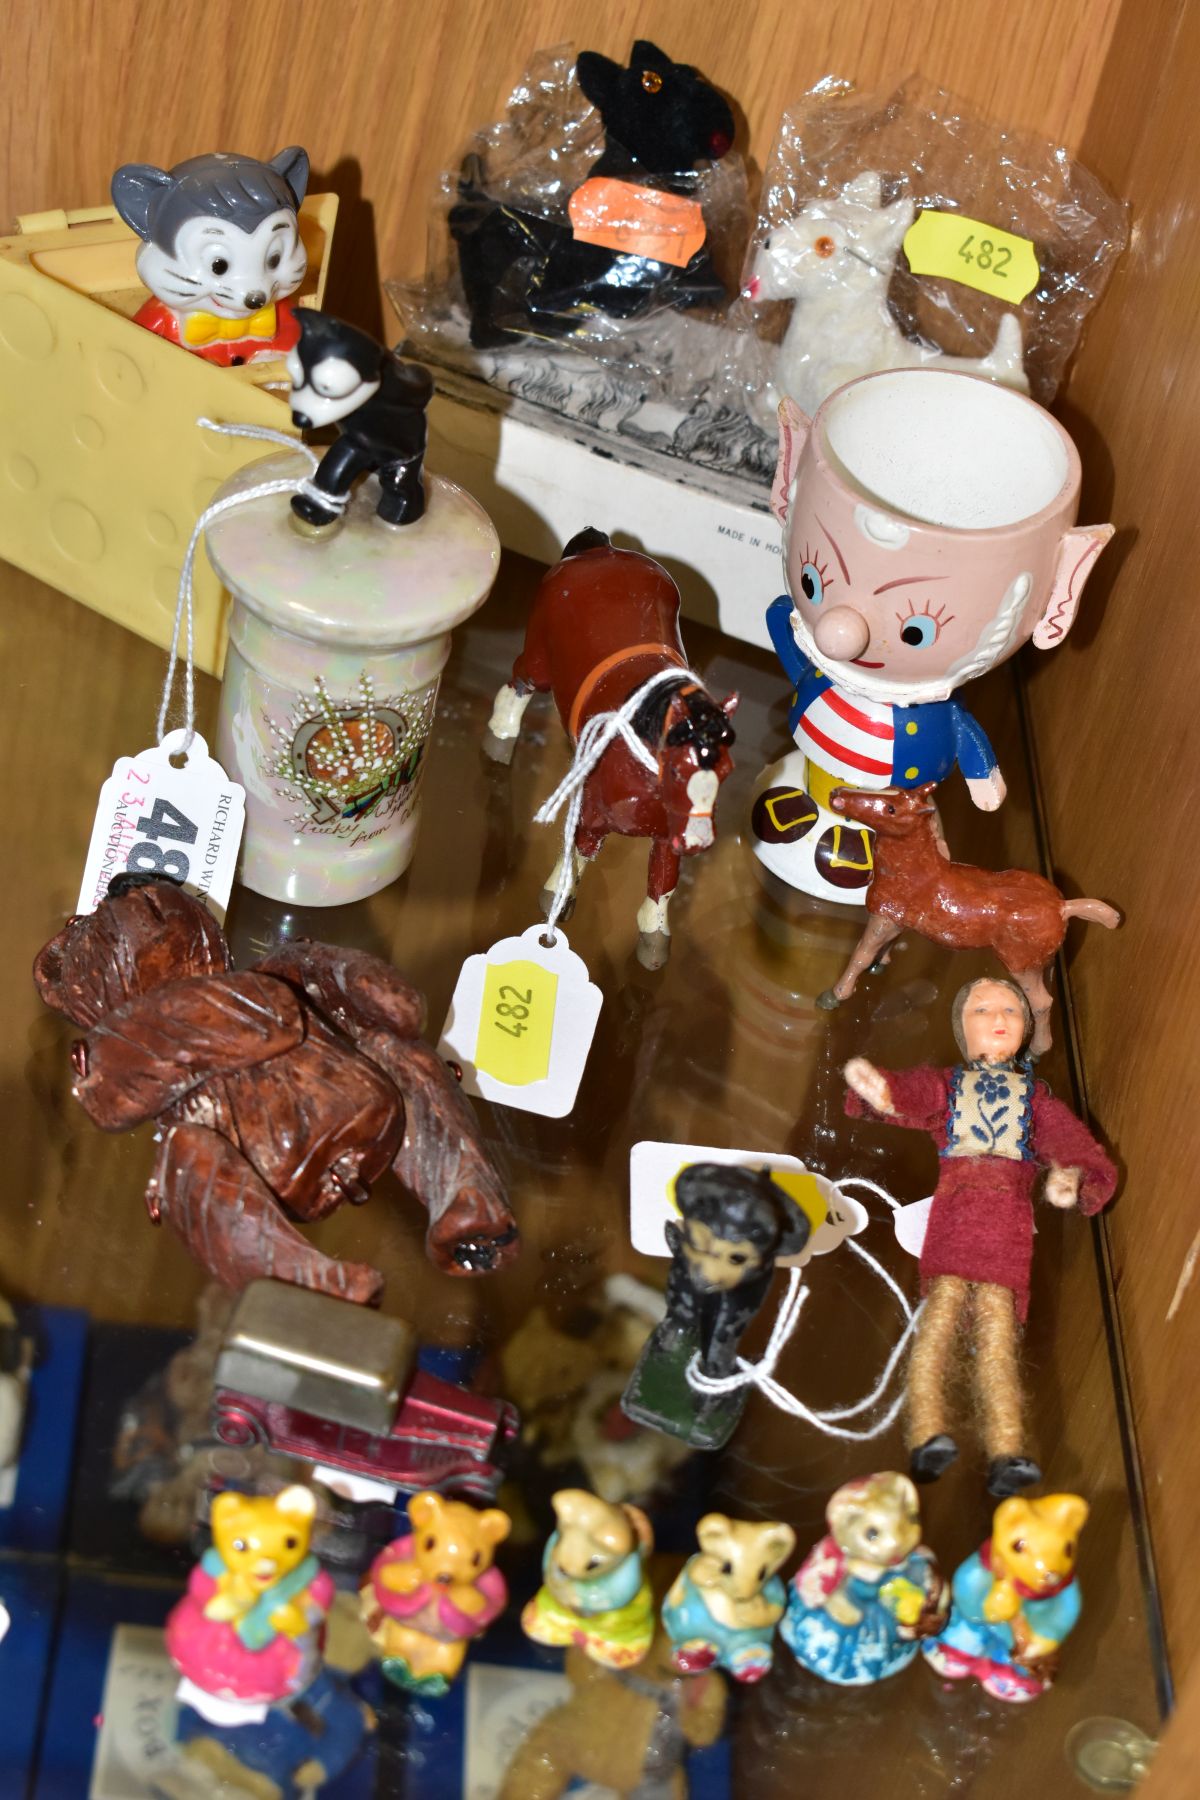 A SMALL GROUP OF LEAD FIGURES AND NOVELTY ITEMS INCLUDING FELIX THE CAT, etc, a Britains